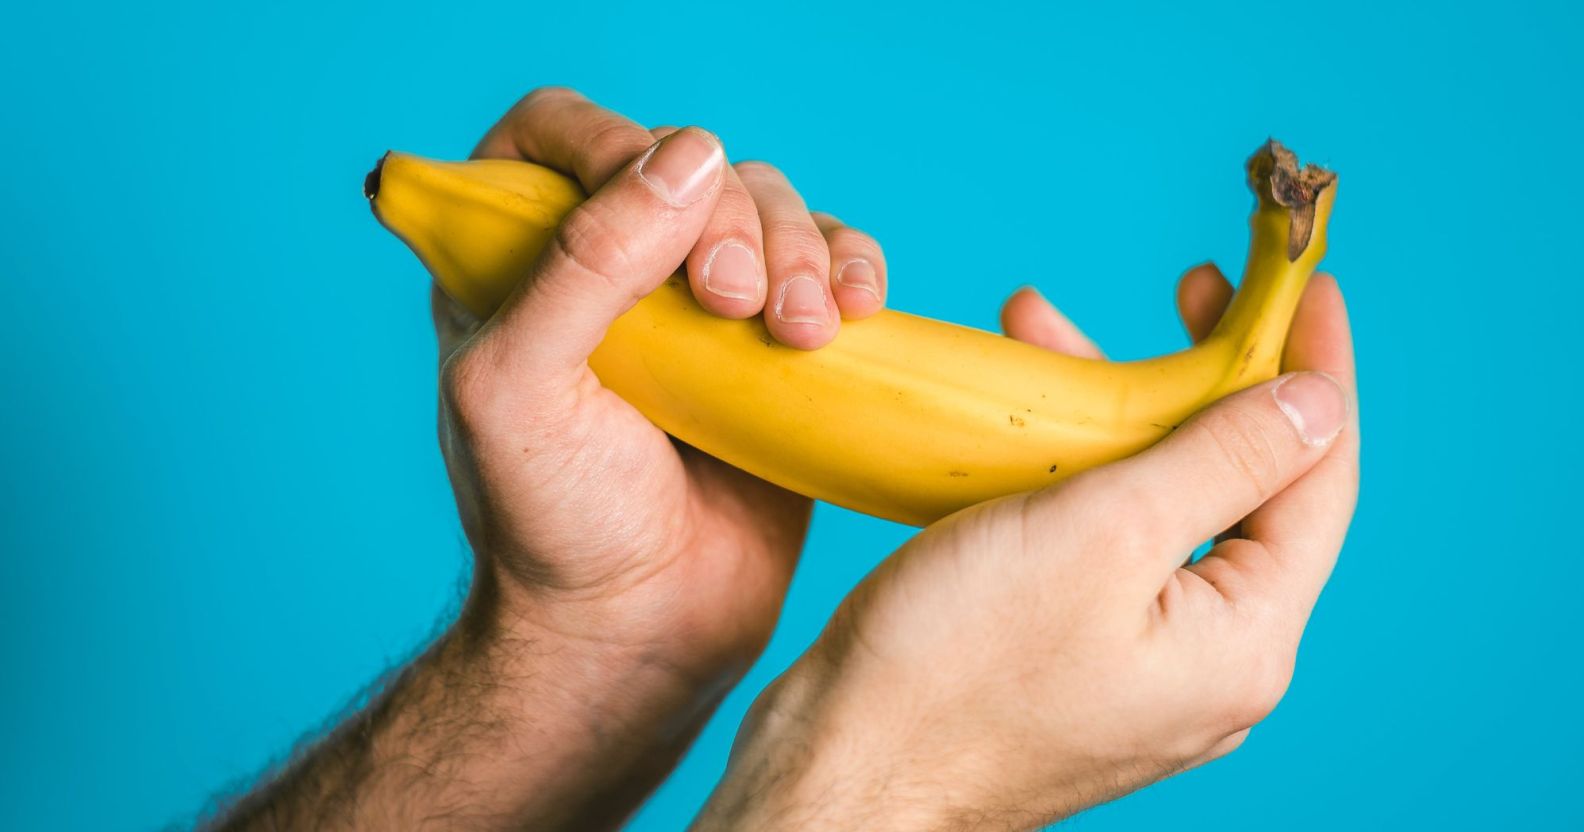 A person is holding a yellow banana in both hands against a light blue background